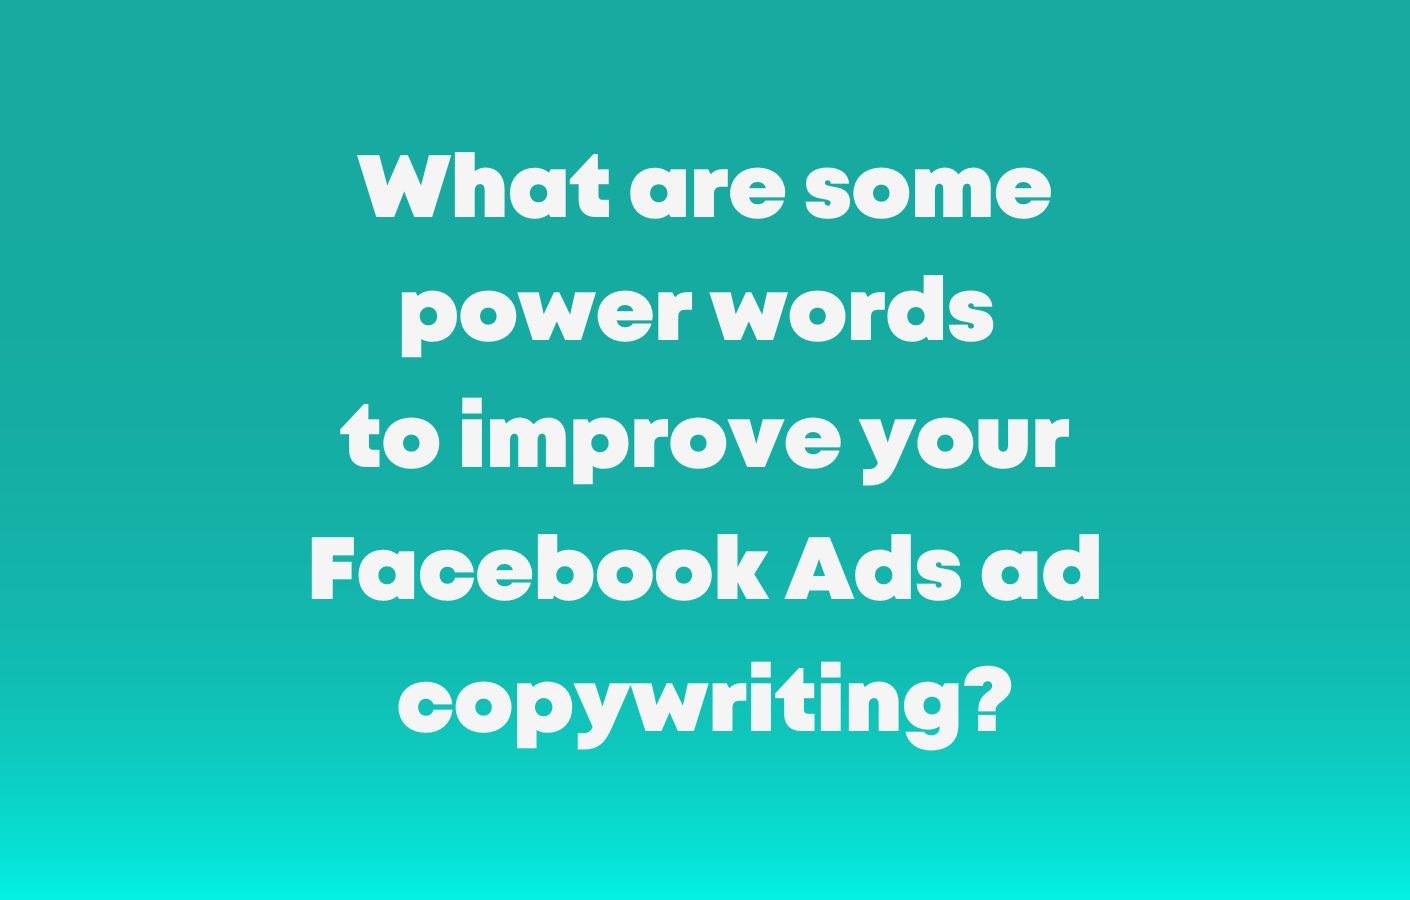 What-are-some-power-words-to-improve-your-Facebook-Ads-ad-copywriting